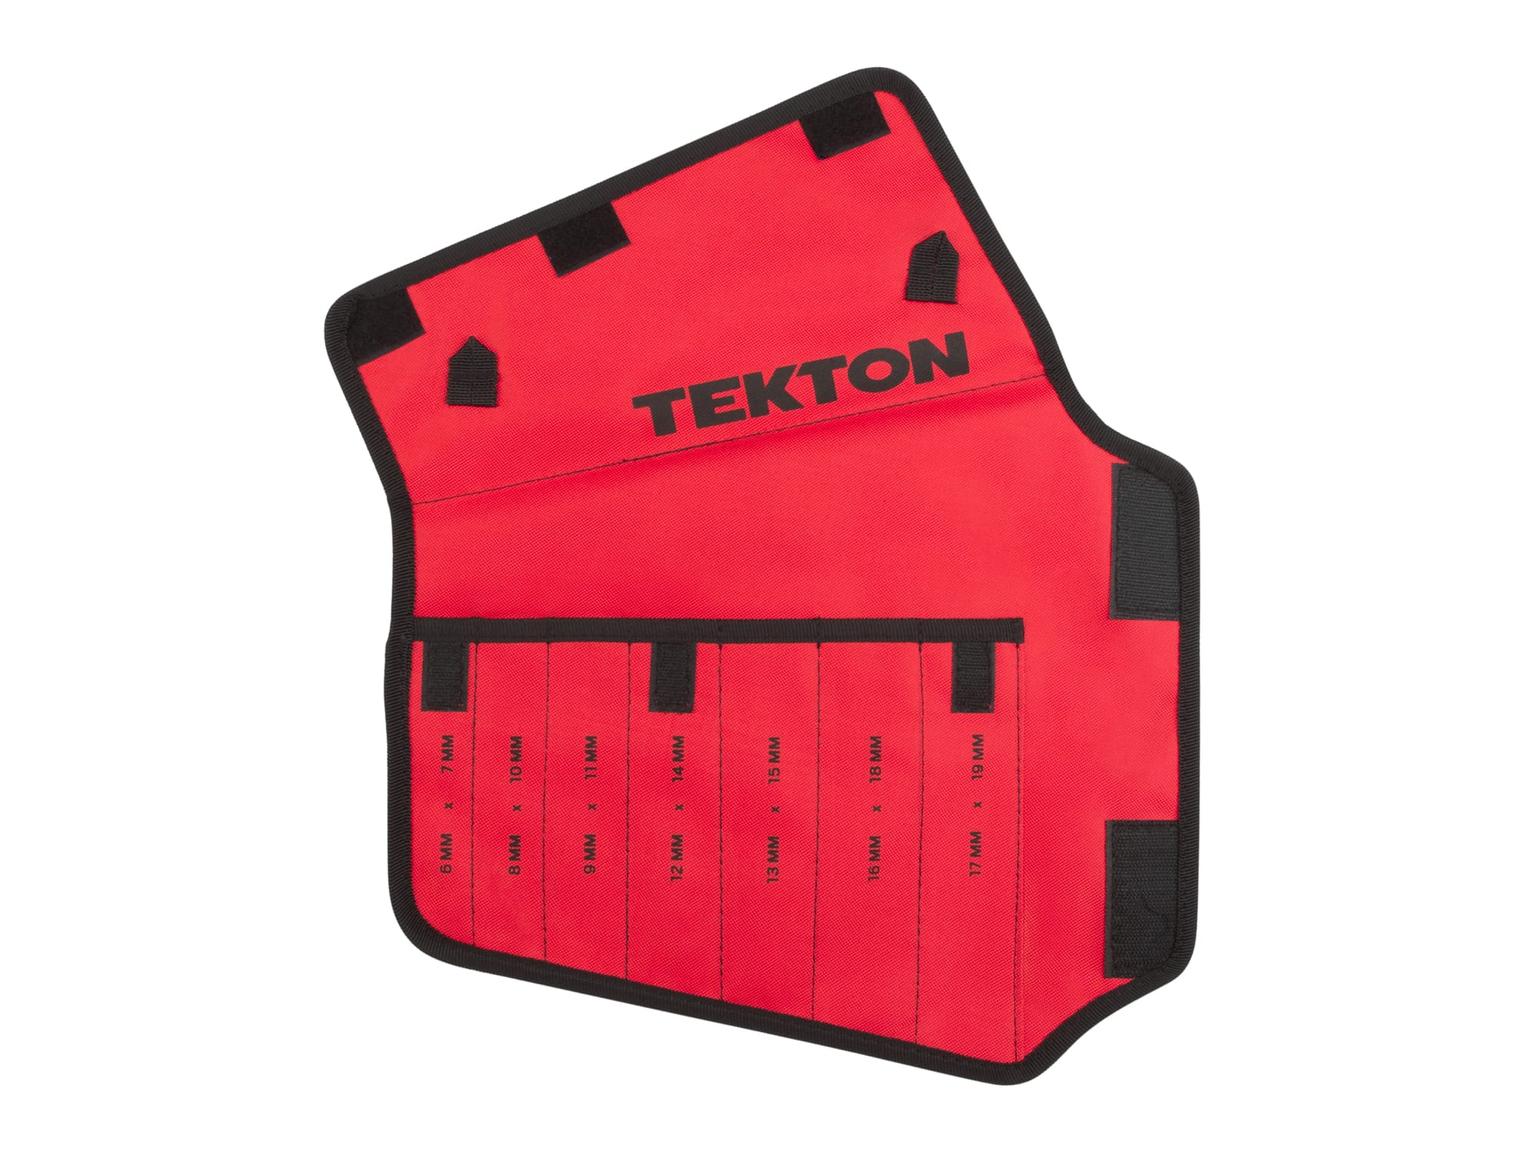 TEKTON ORG27807-T 7-Tool Box End Wrench Pouch (6-19 mm)